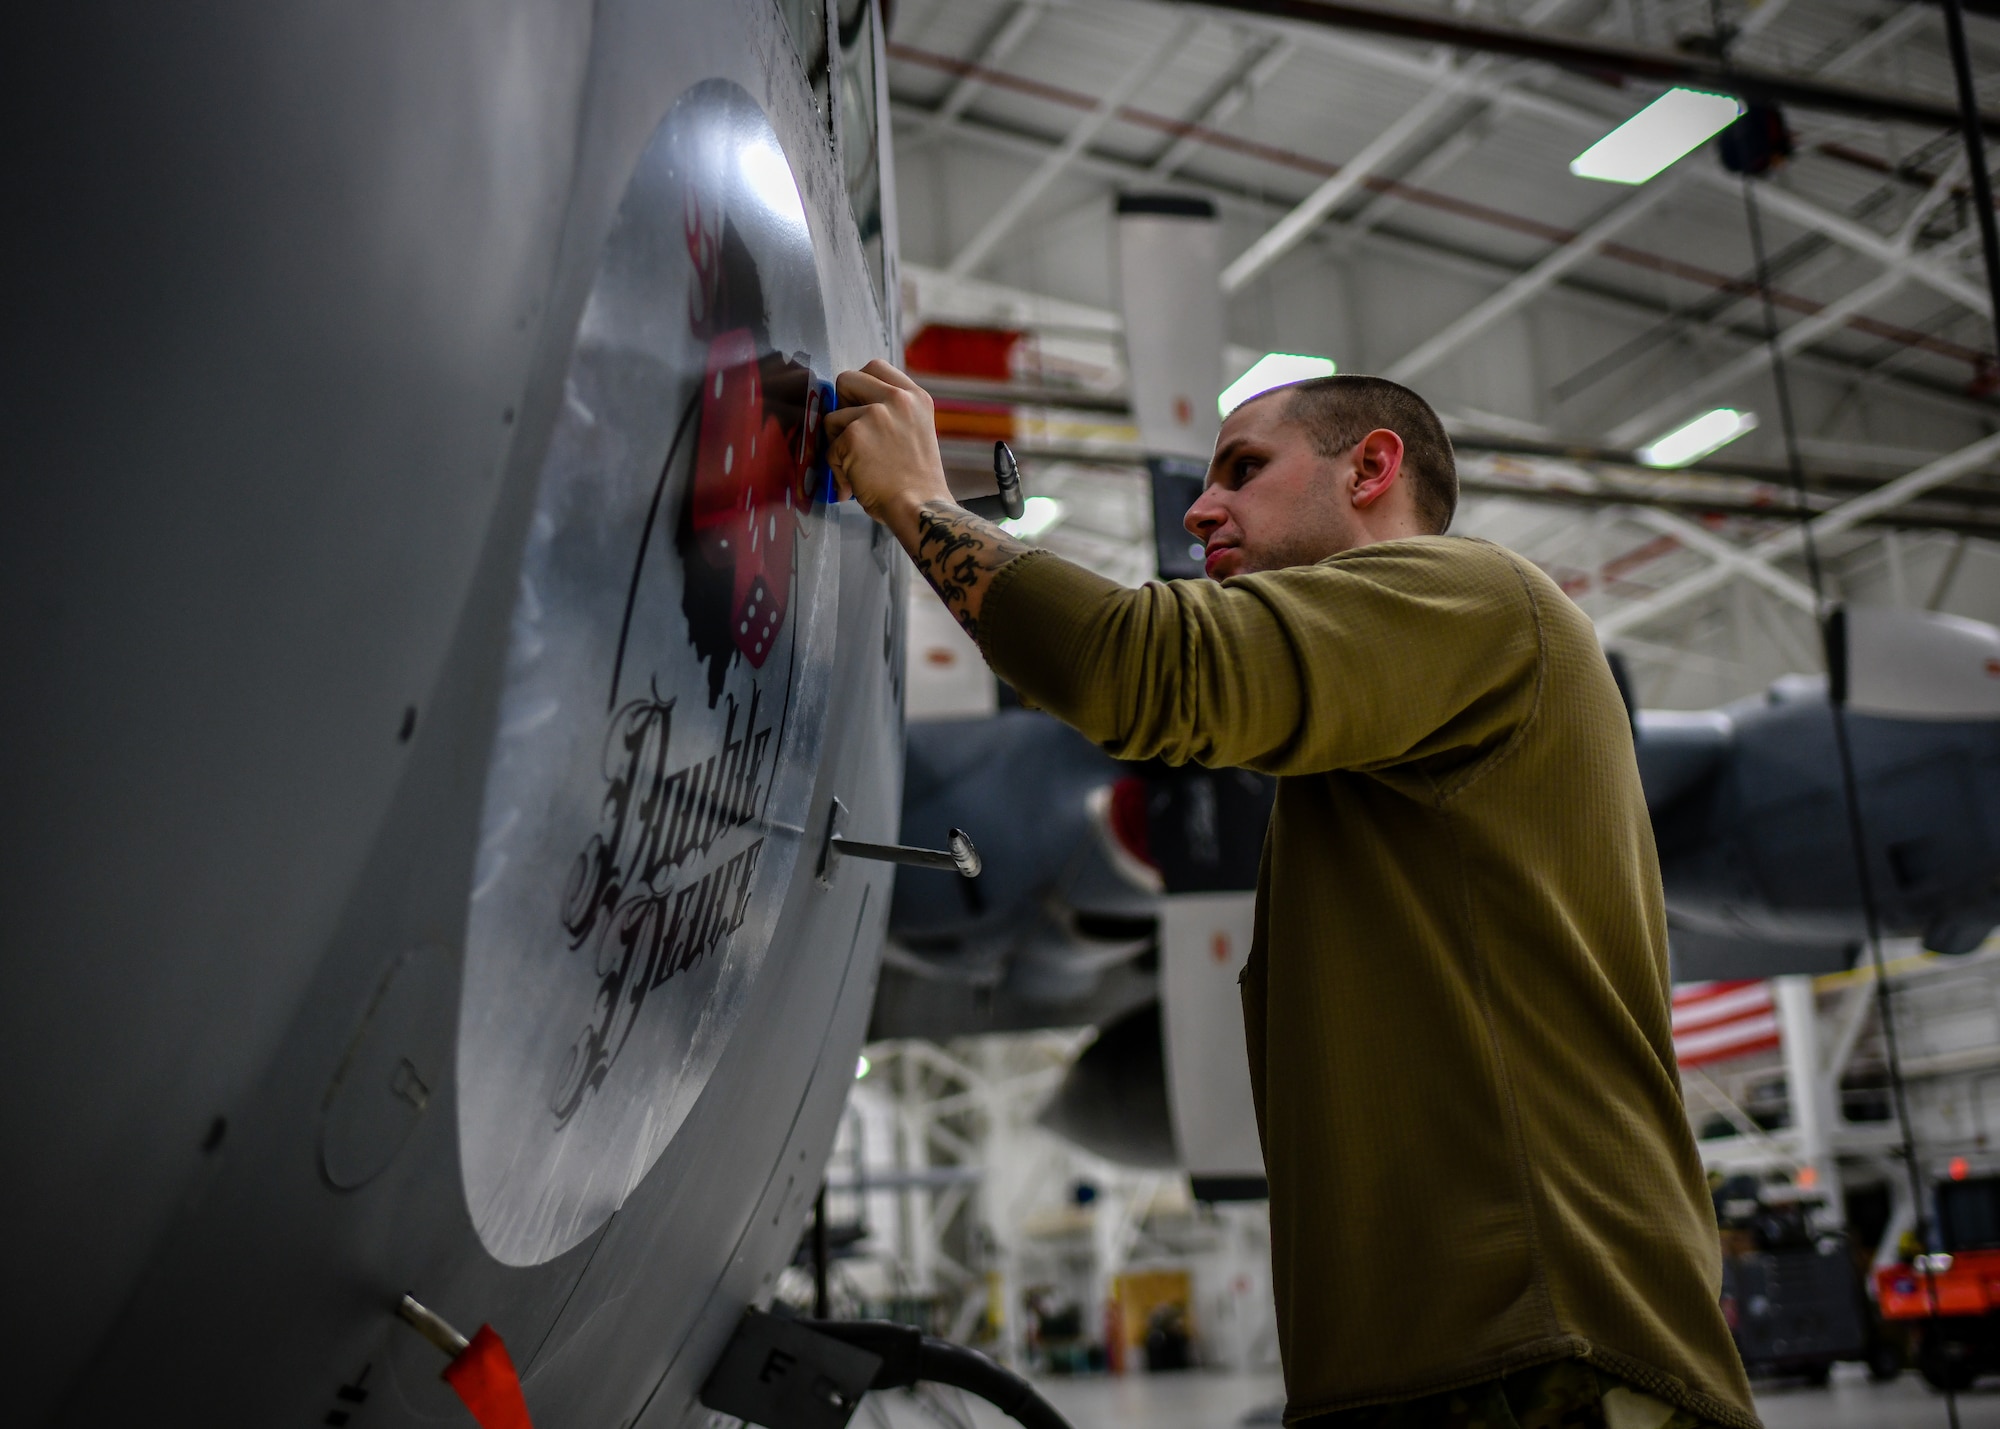 A 910th Airlift Wing C-130H Hercules aircraft received new nose art Feb. 4, 2020.